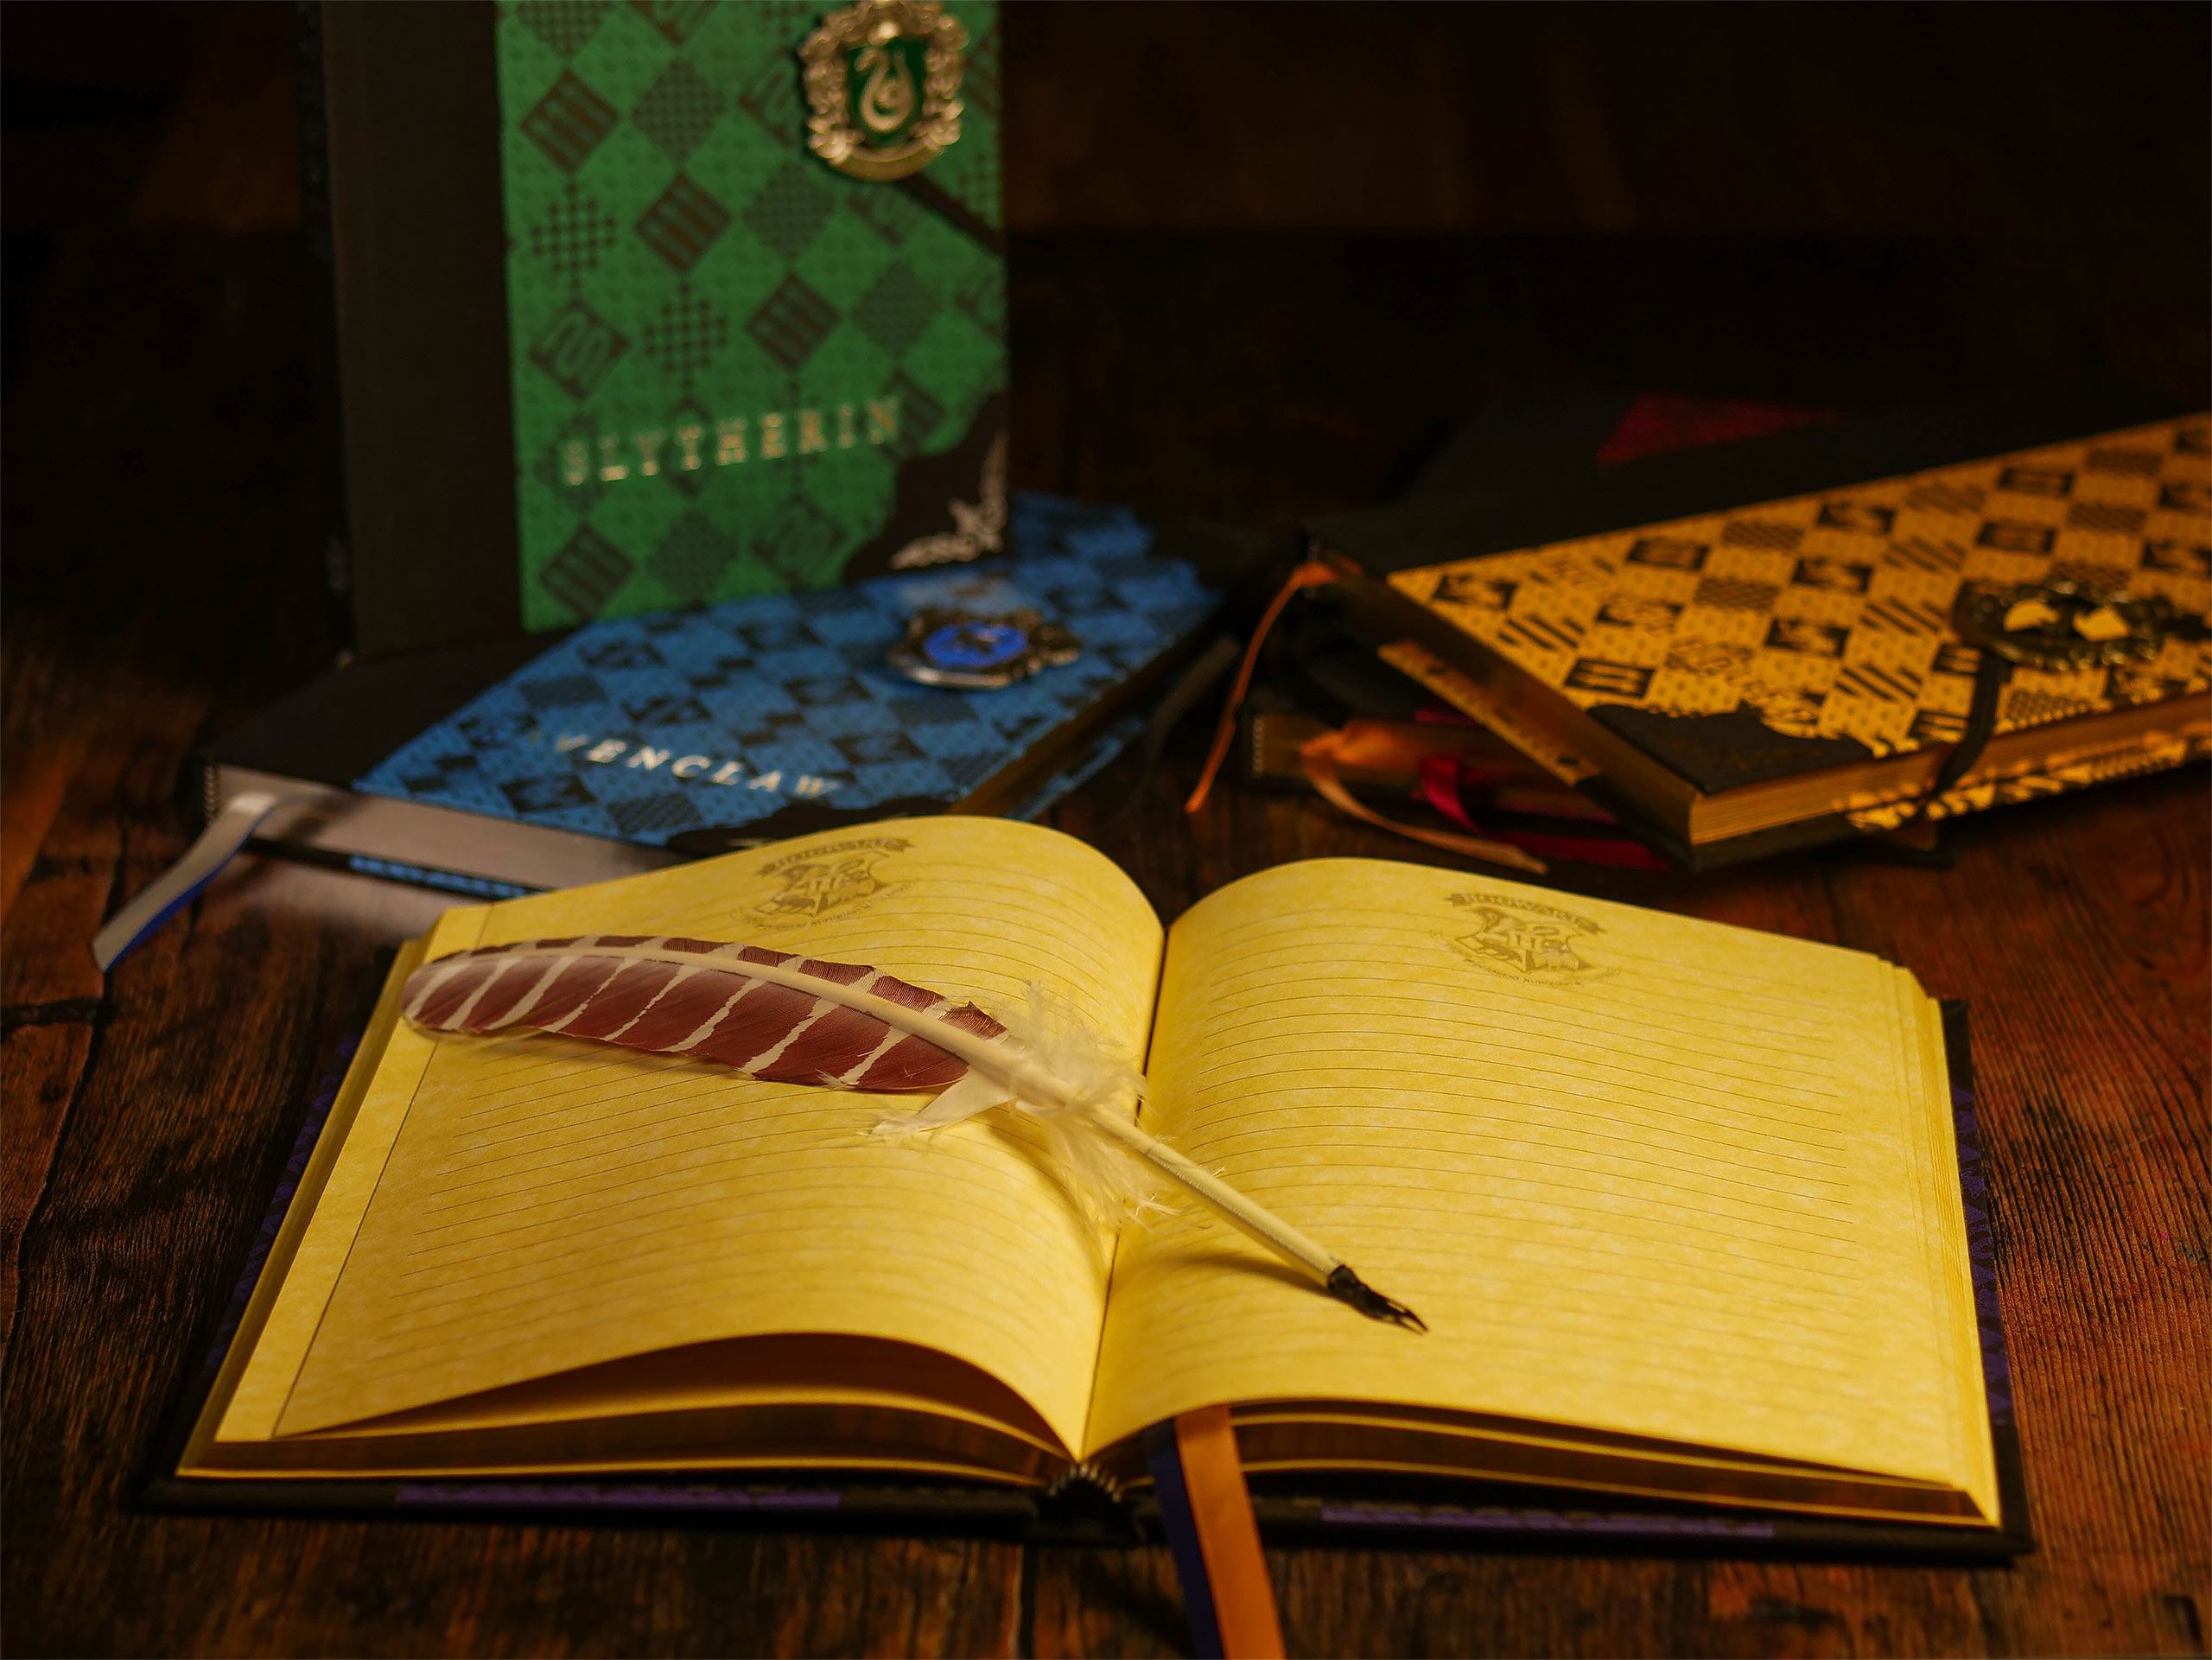 Harry Potter - Ravenclaw Crest Deluxe Notebook